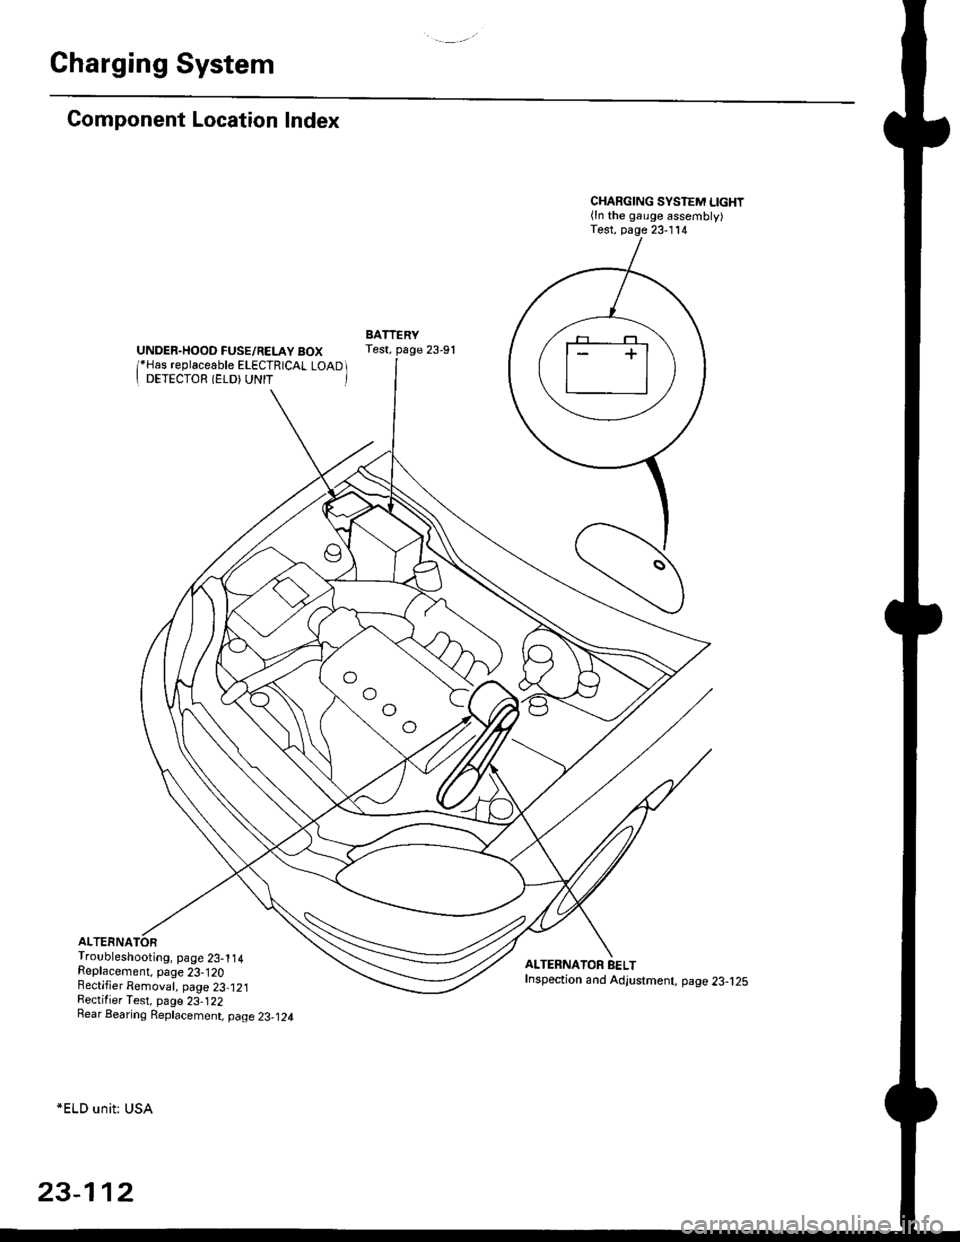 HONDA CIVIC 1997 6.G Workshop Manual Charging System
Component Location Index
UNDER.HOOD FUSE/RELAY BOX/*Has replaceable ELECTRICAL LOAD II DETECTOR (ELD) UNIT 
Troubleshooting, page 23-1 14Replacement, page 23-120Bectifier Removal, pag